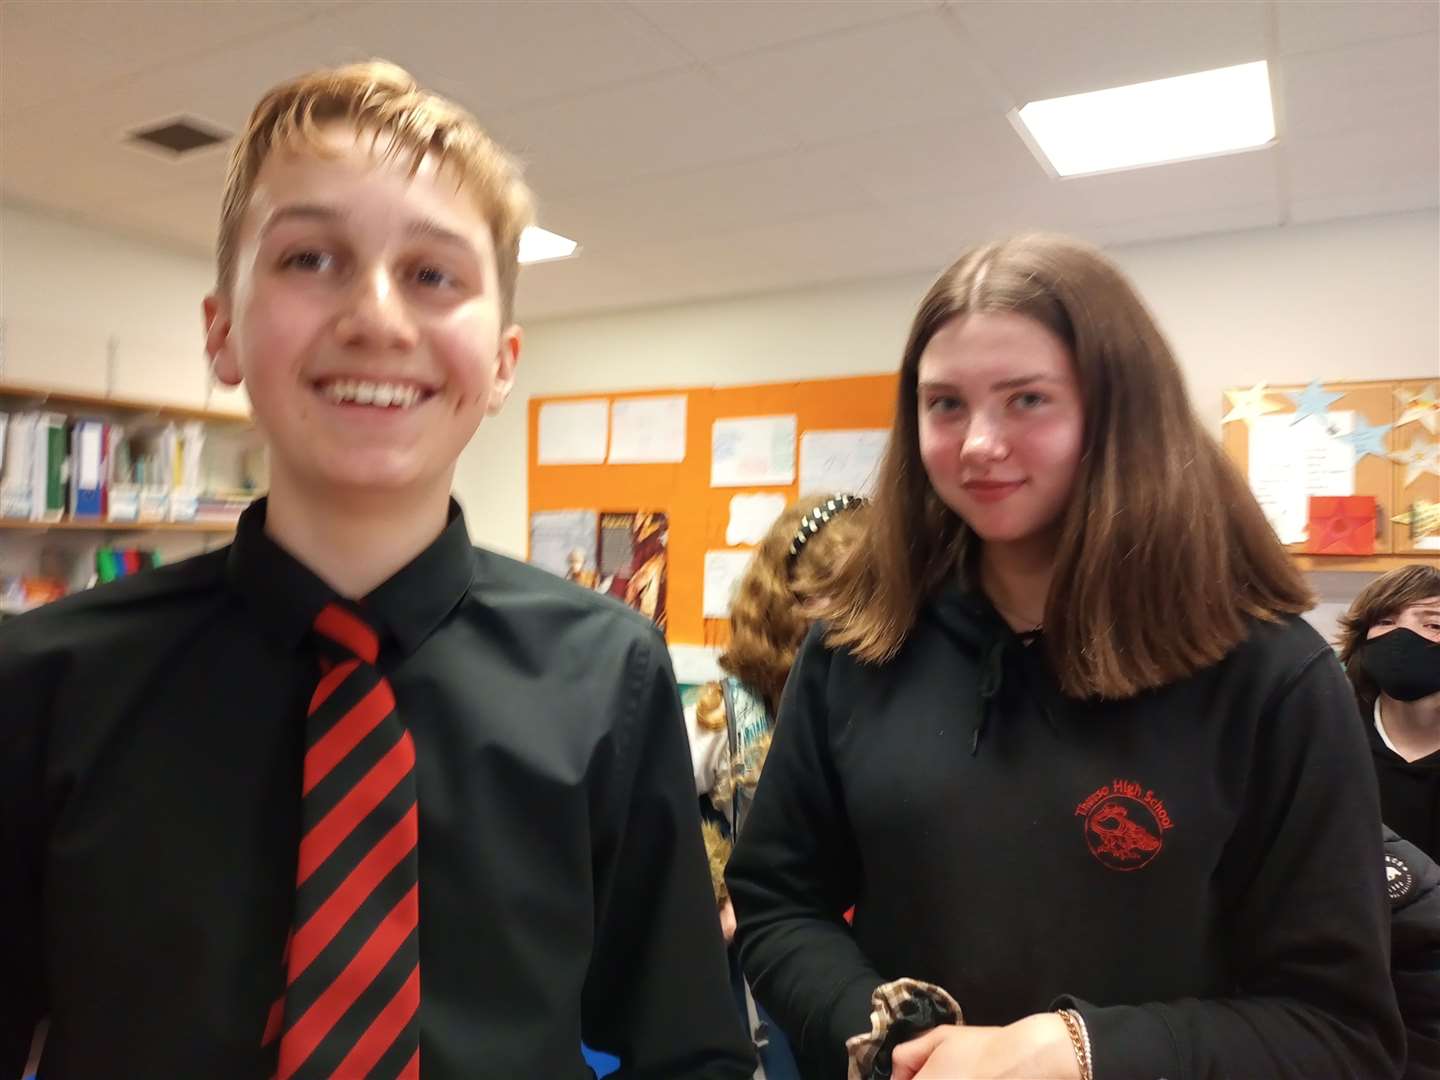 Alan and Julia from S2 at Thurso High School.